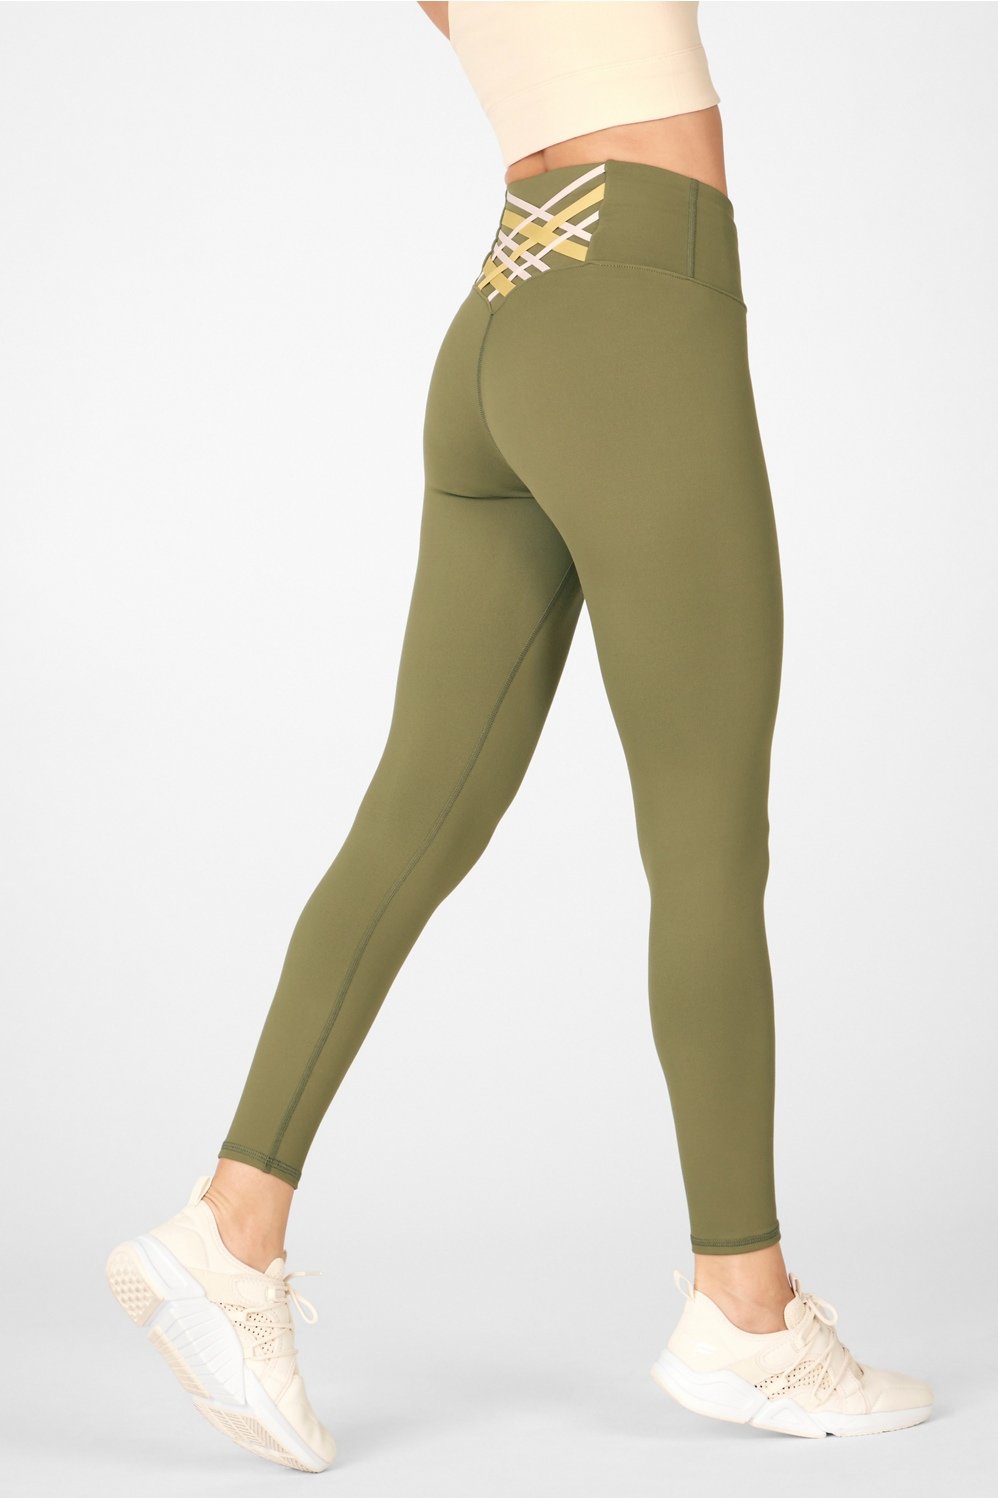 Active Collective Dreamblend 7/8 Leggings in Utility Brown